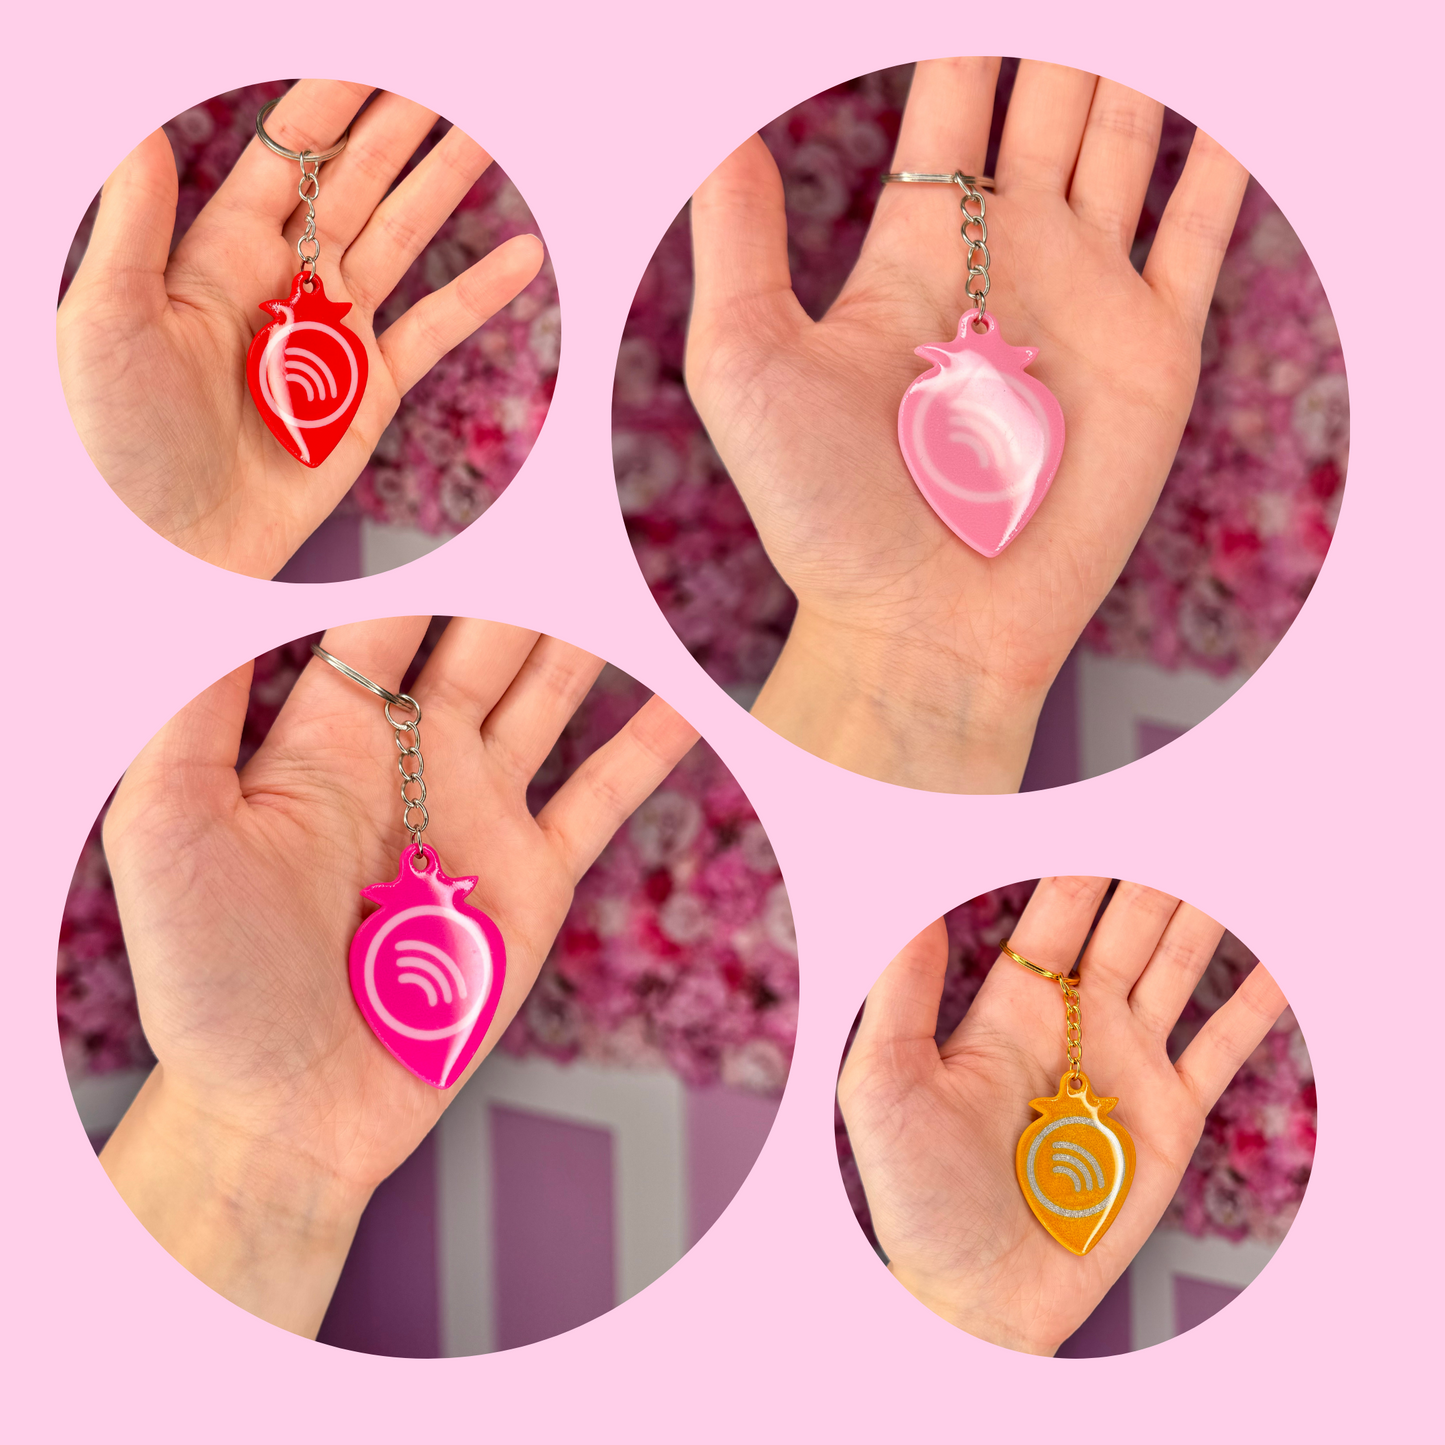 NFC Strawberry KeyChain Free Delivery